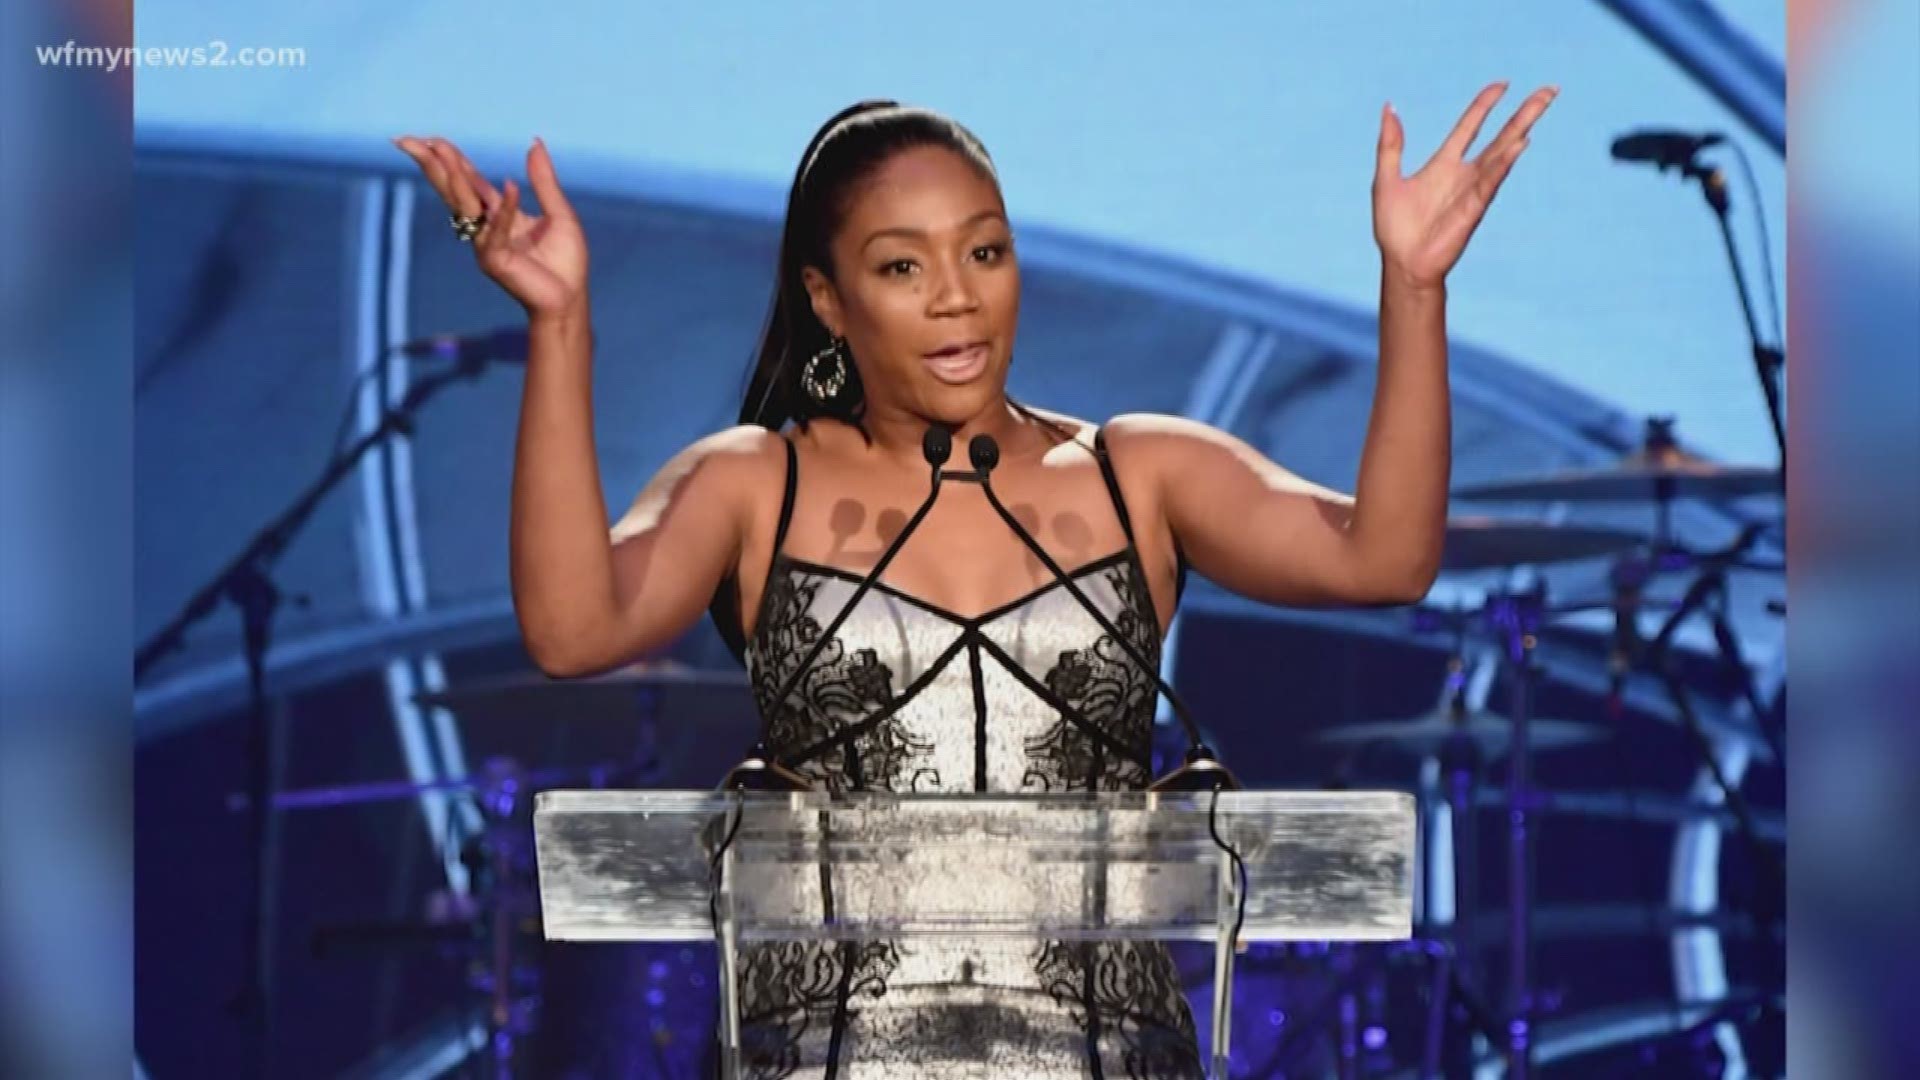 Comedian Tiffany Haddish reportedly forget a few of her own lines during a public New Year's Eve event. Haddish shamed herself on Twitter, and
others users to quick to judge.